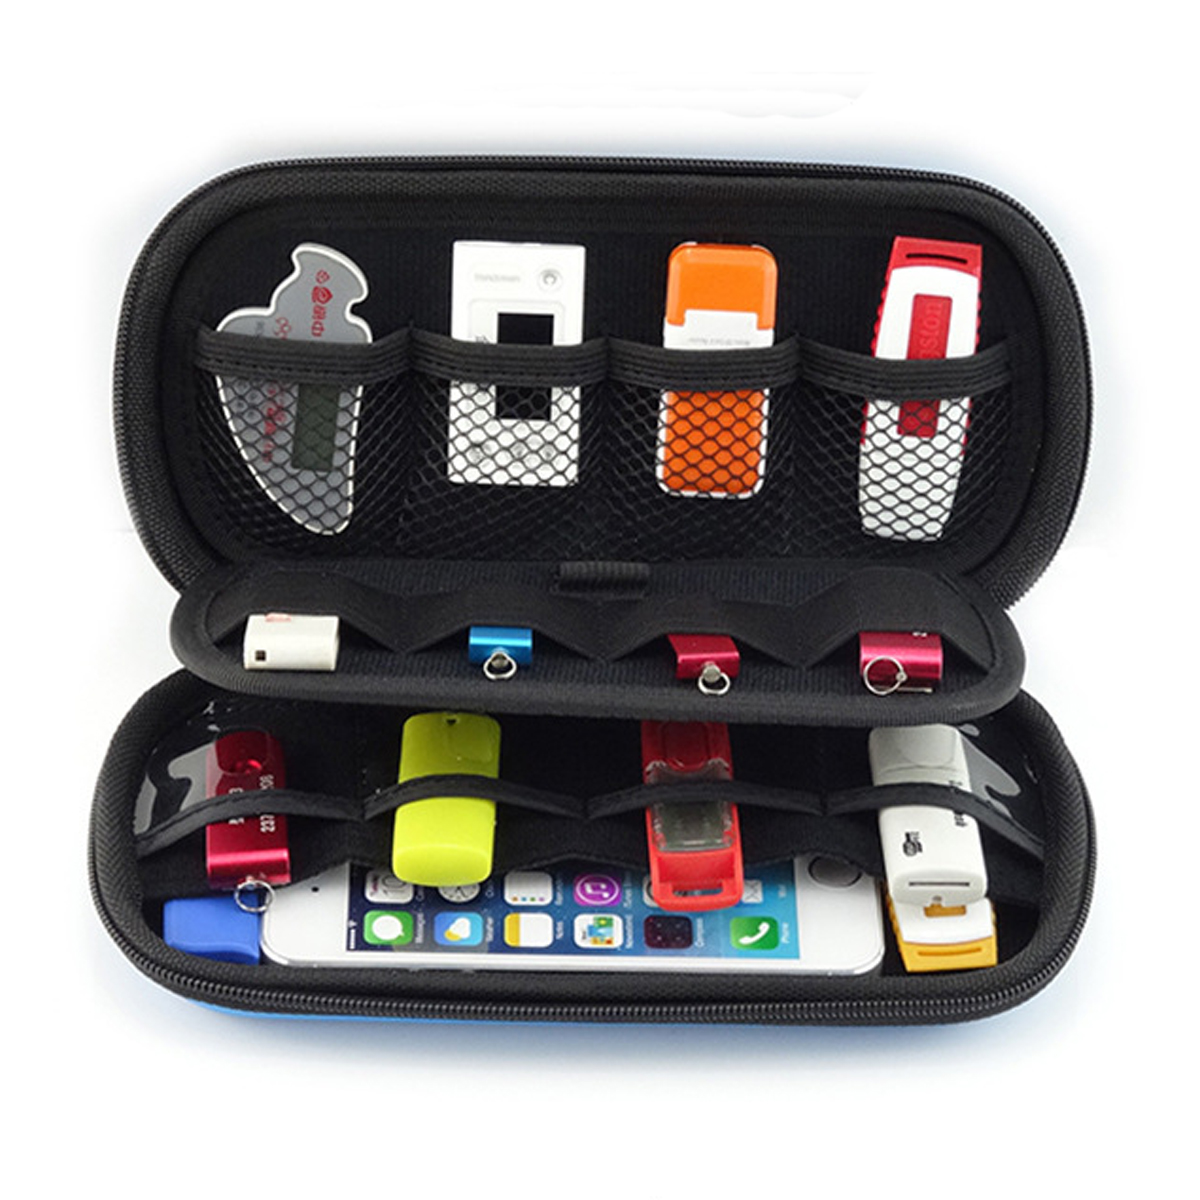 Multifunctional-EVA-Bag-For-TF-Data-Cable-USB-Flash-Drive-Hard-Disk-Cell-Phone-Holder-Waterproof-Dig-1890378-3